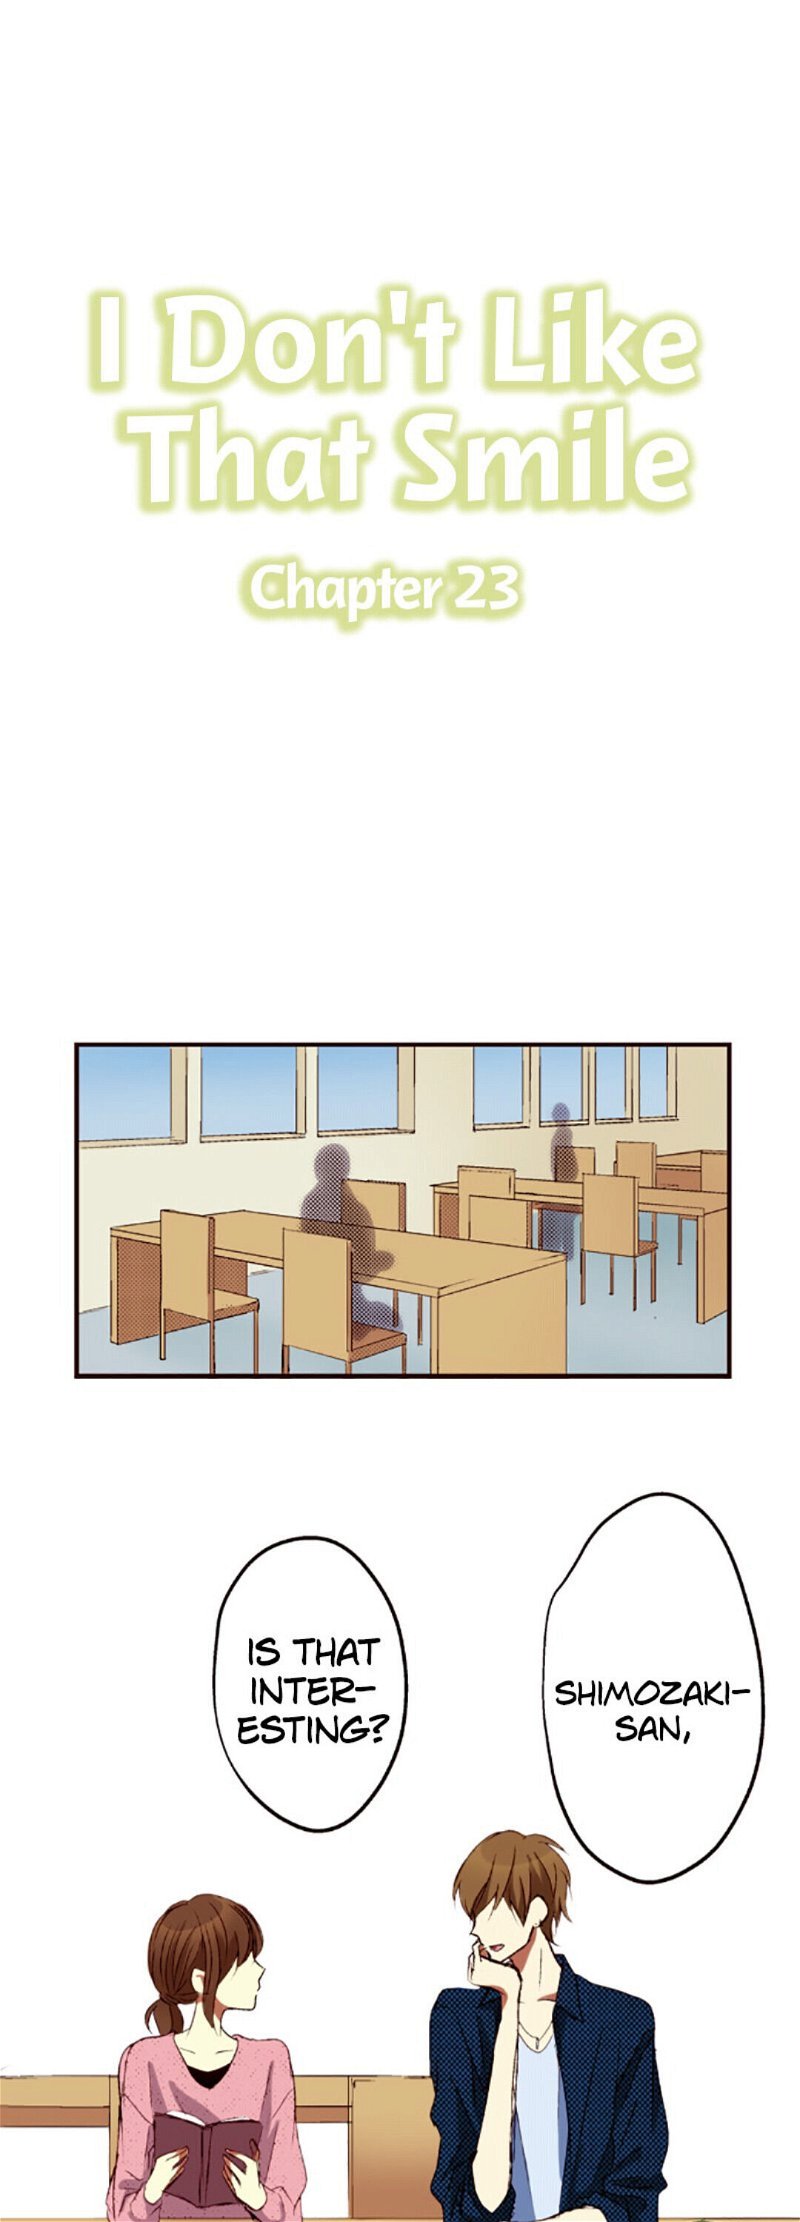 I Don’t Like That Smile Chapter 23 - Page 0